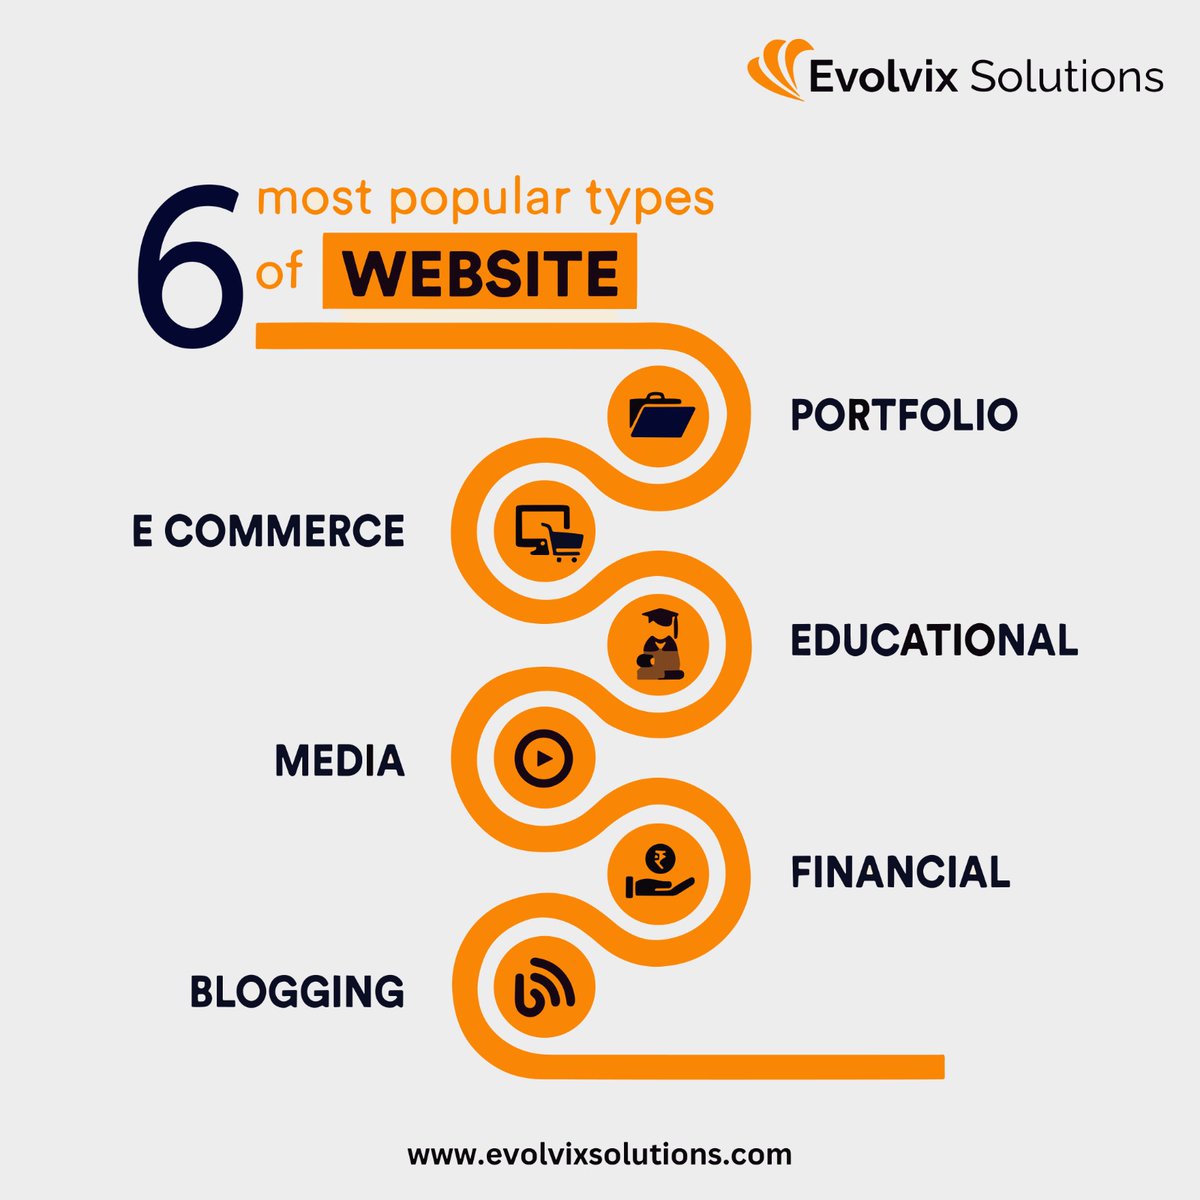 'Explore a world of possibilities! From dynamic e-commerce to informative blogs, discover the most popular website types that cater to your needs. #WebDesign #Ecommerce #Blogging #TechTrends #DigitalWorld #ExploreOnline'